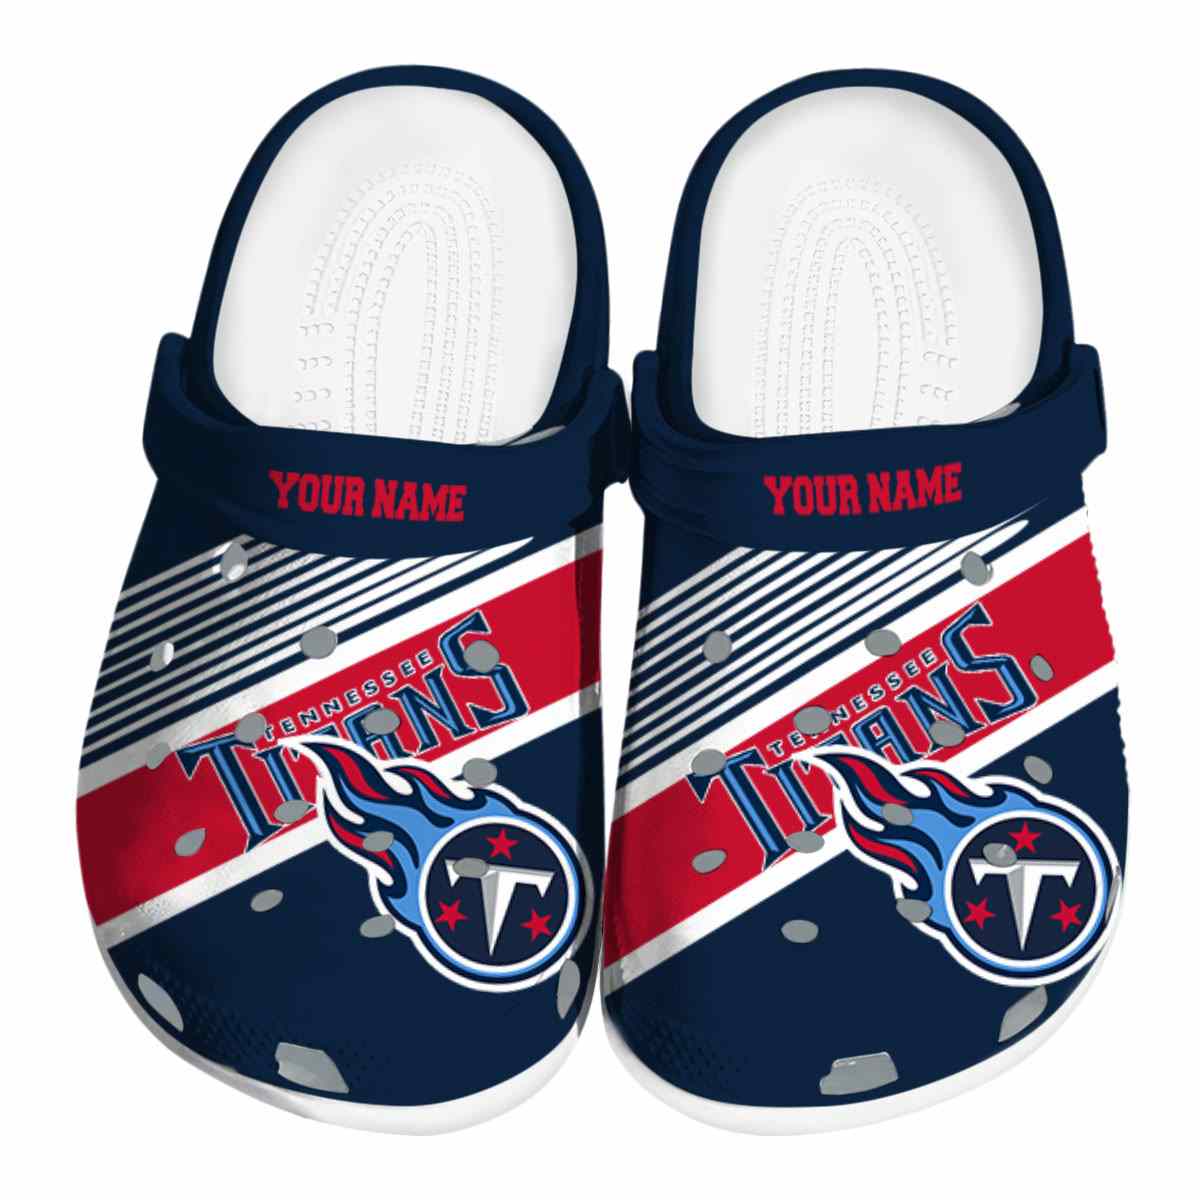 Customized Tennessee Titans Vibrant Dual Tone Crocs Best selling